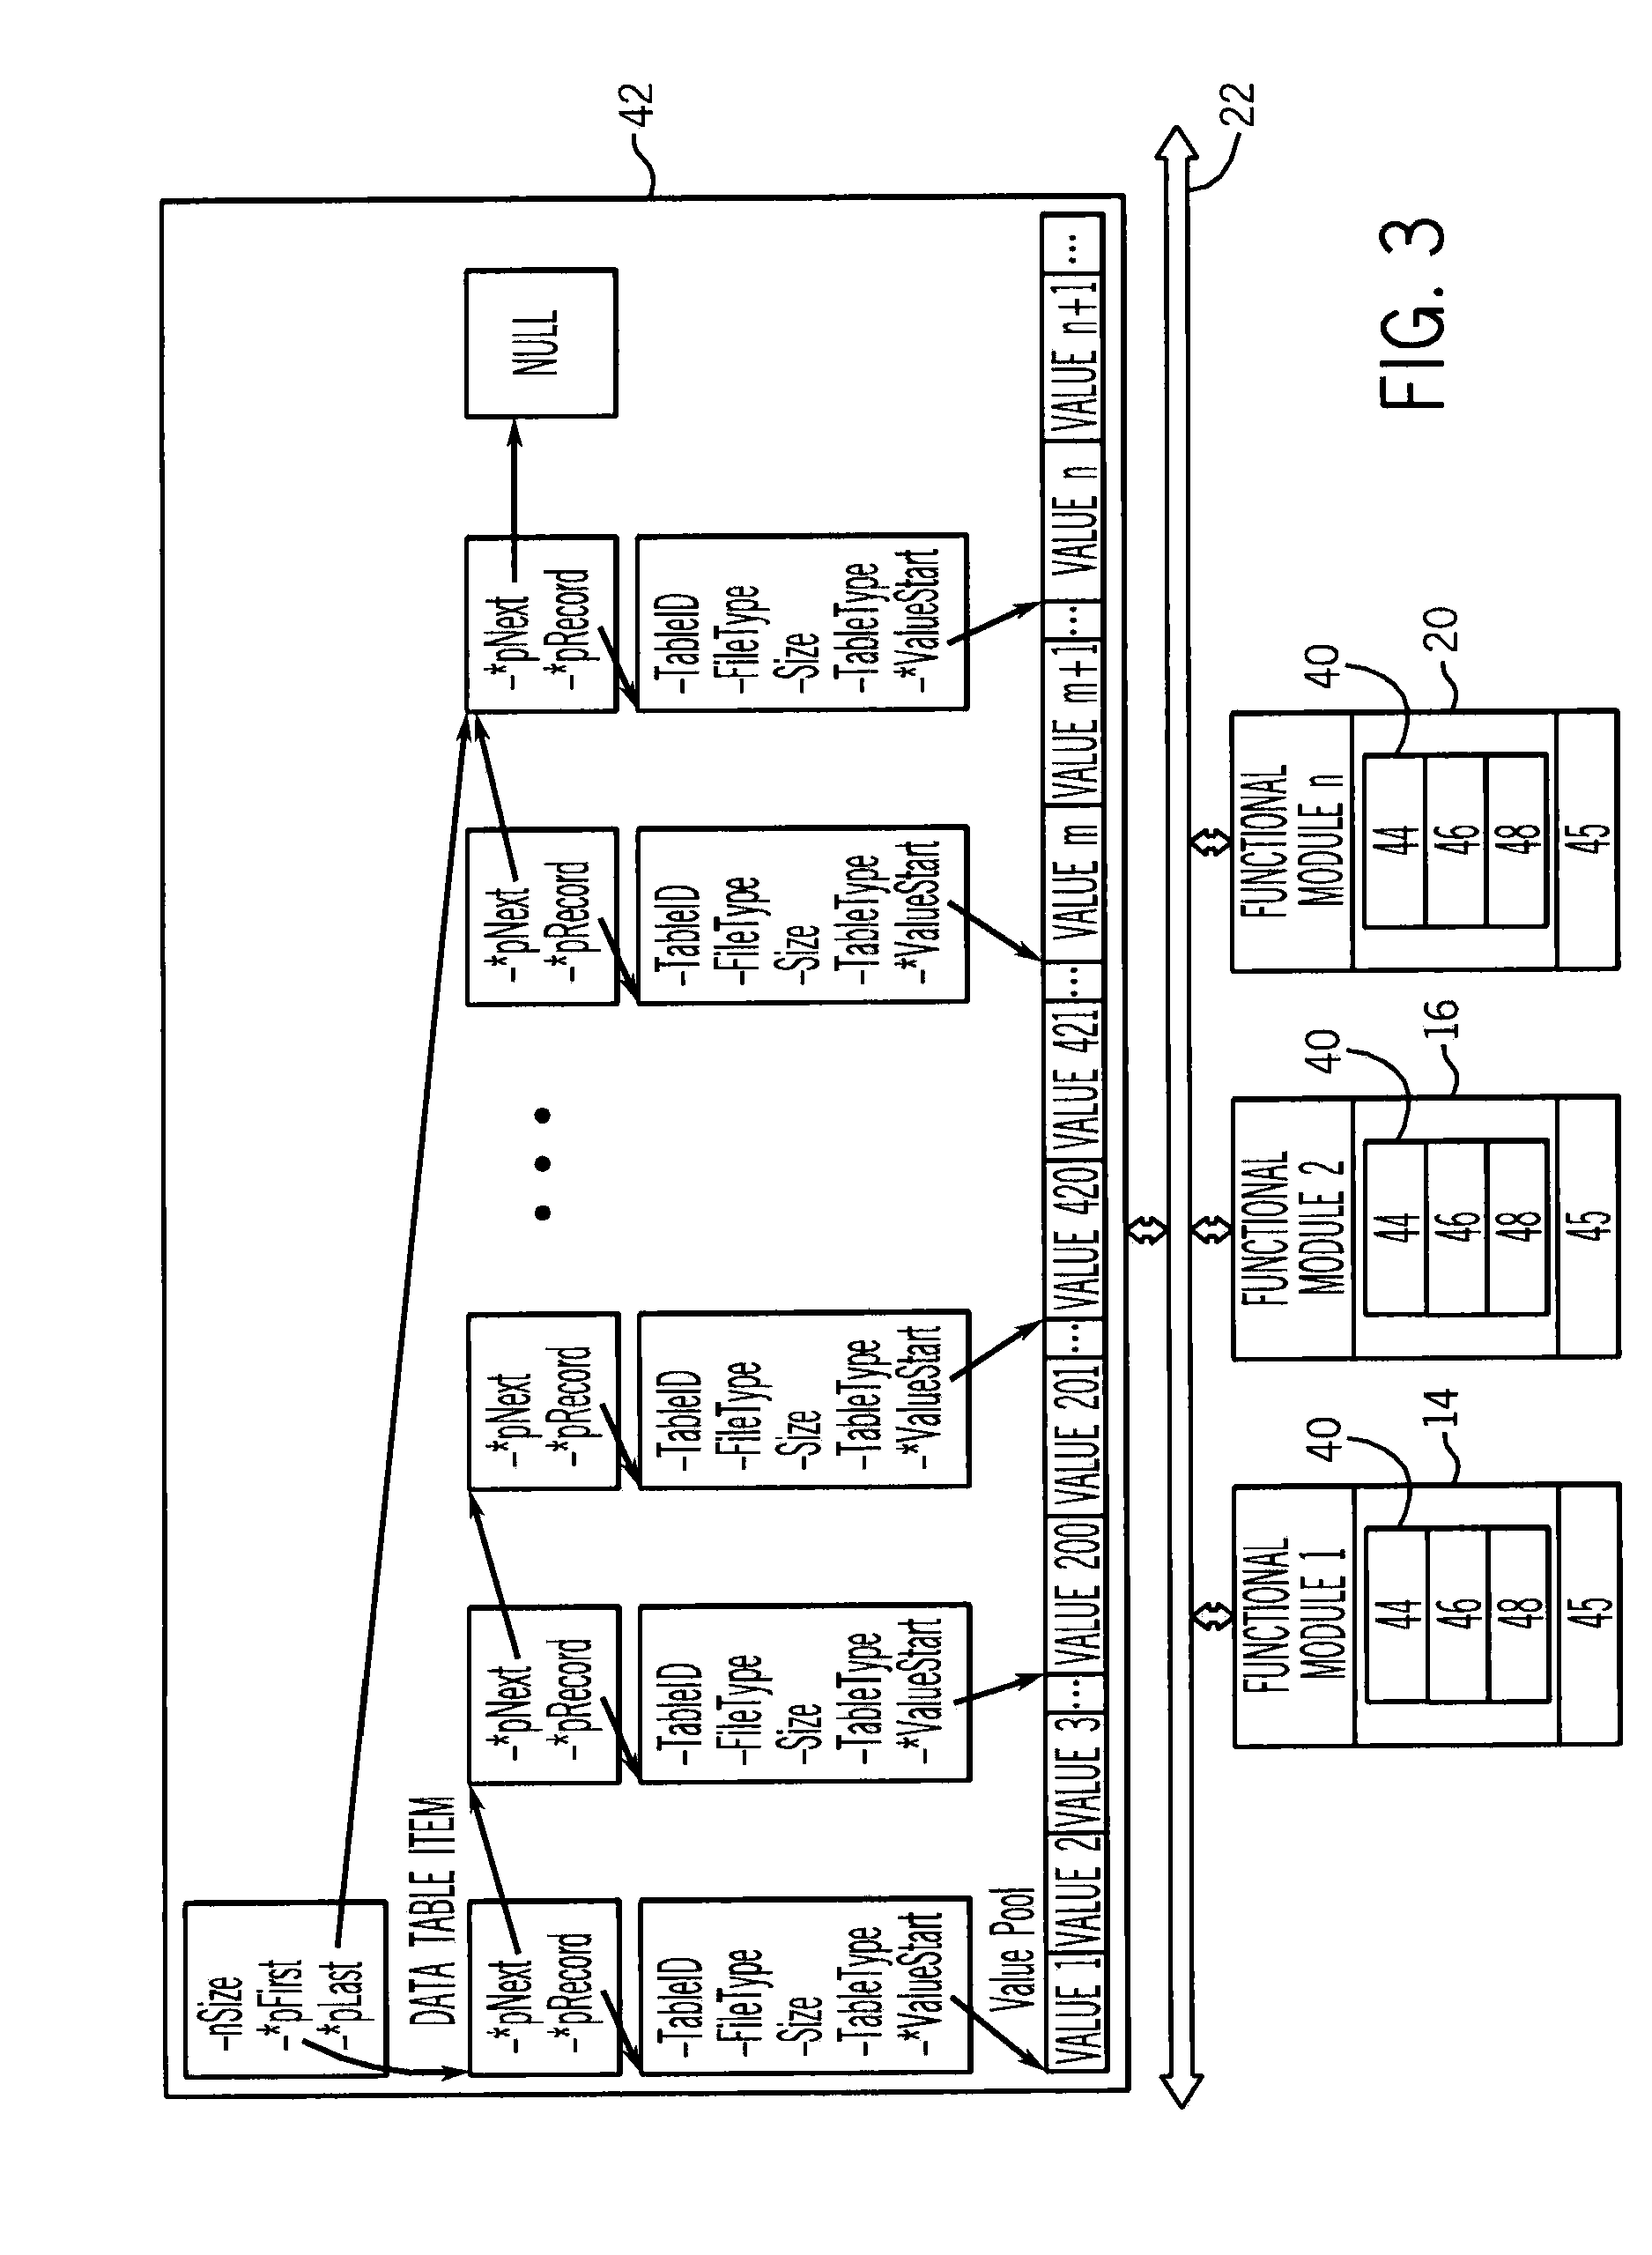 Self-organized power and energy control and management systems and methods